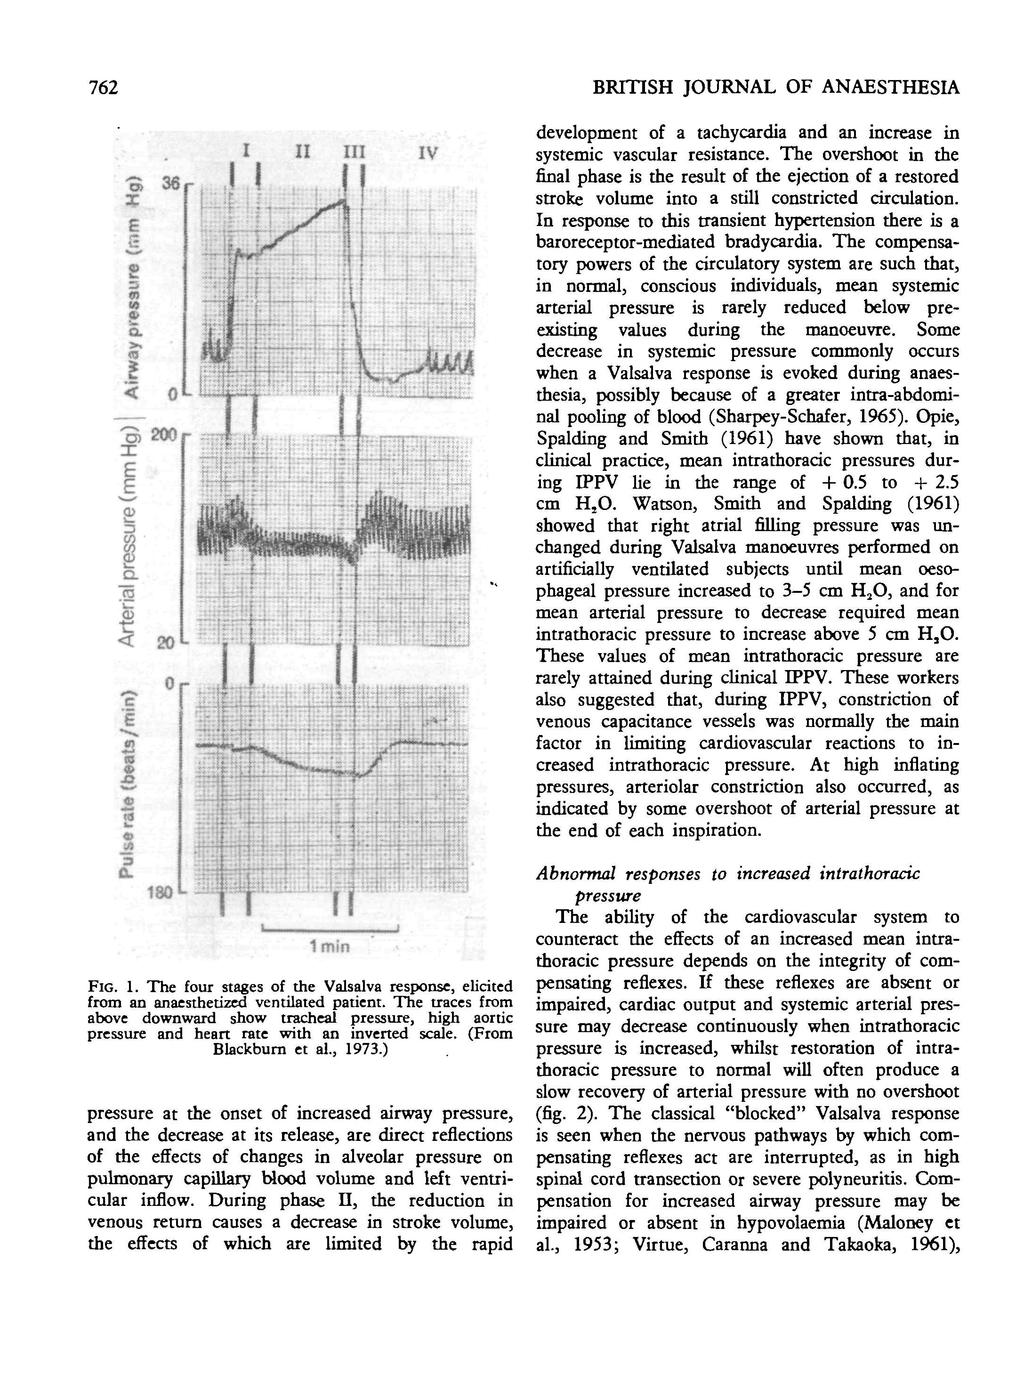 BRITISH JOURNAL OF ANAESTHESIA 762 development of a tachycardia and an increase in systemic vascular resistance.